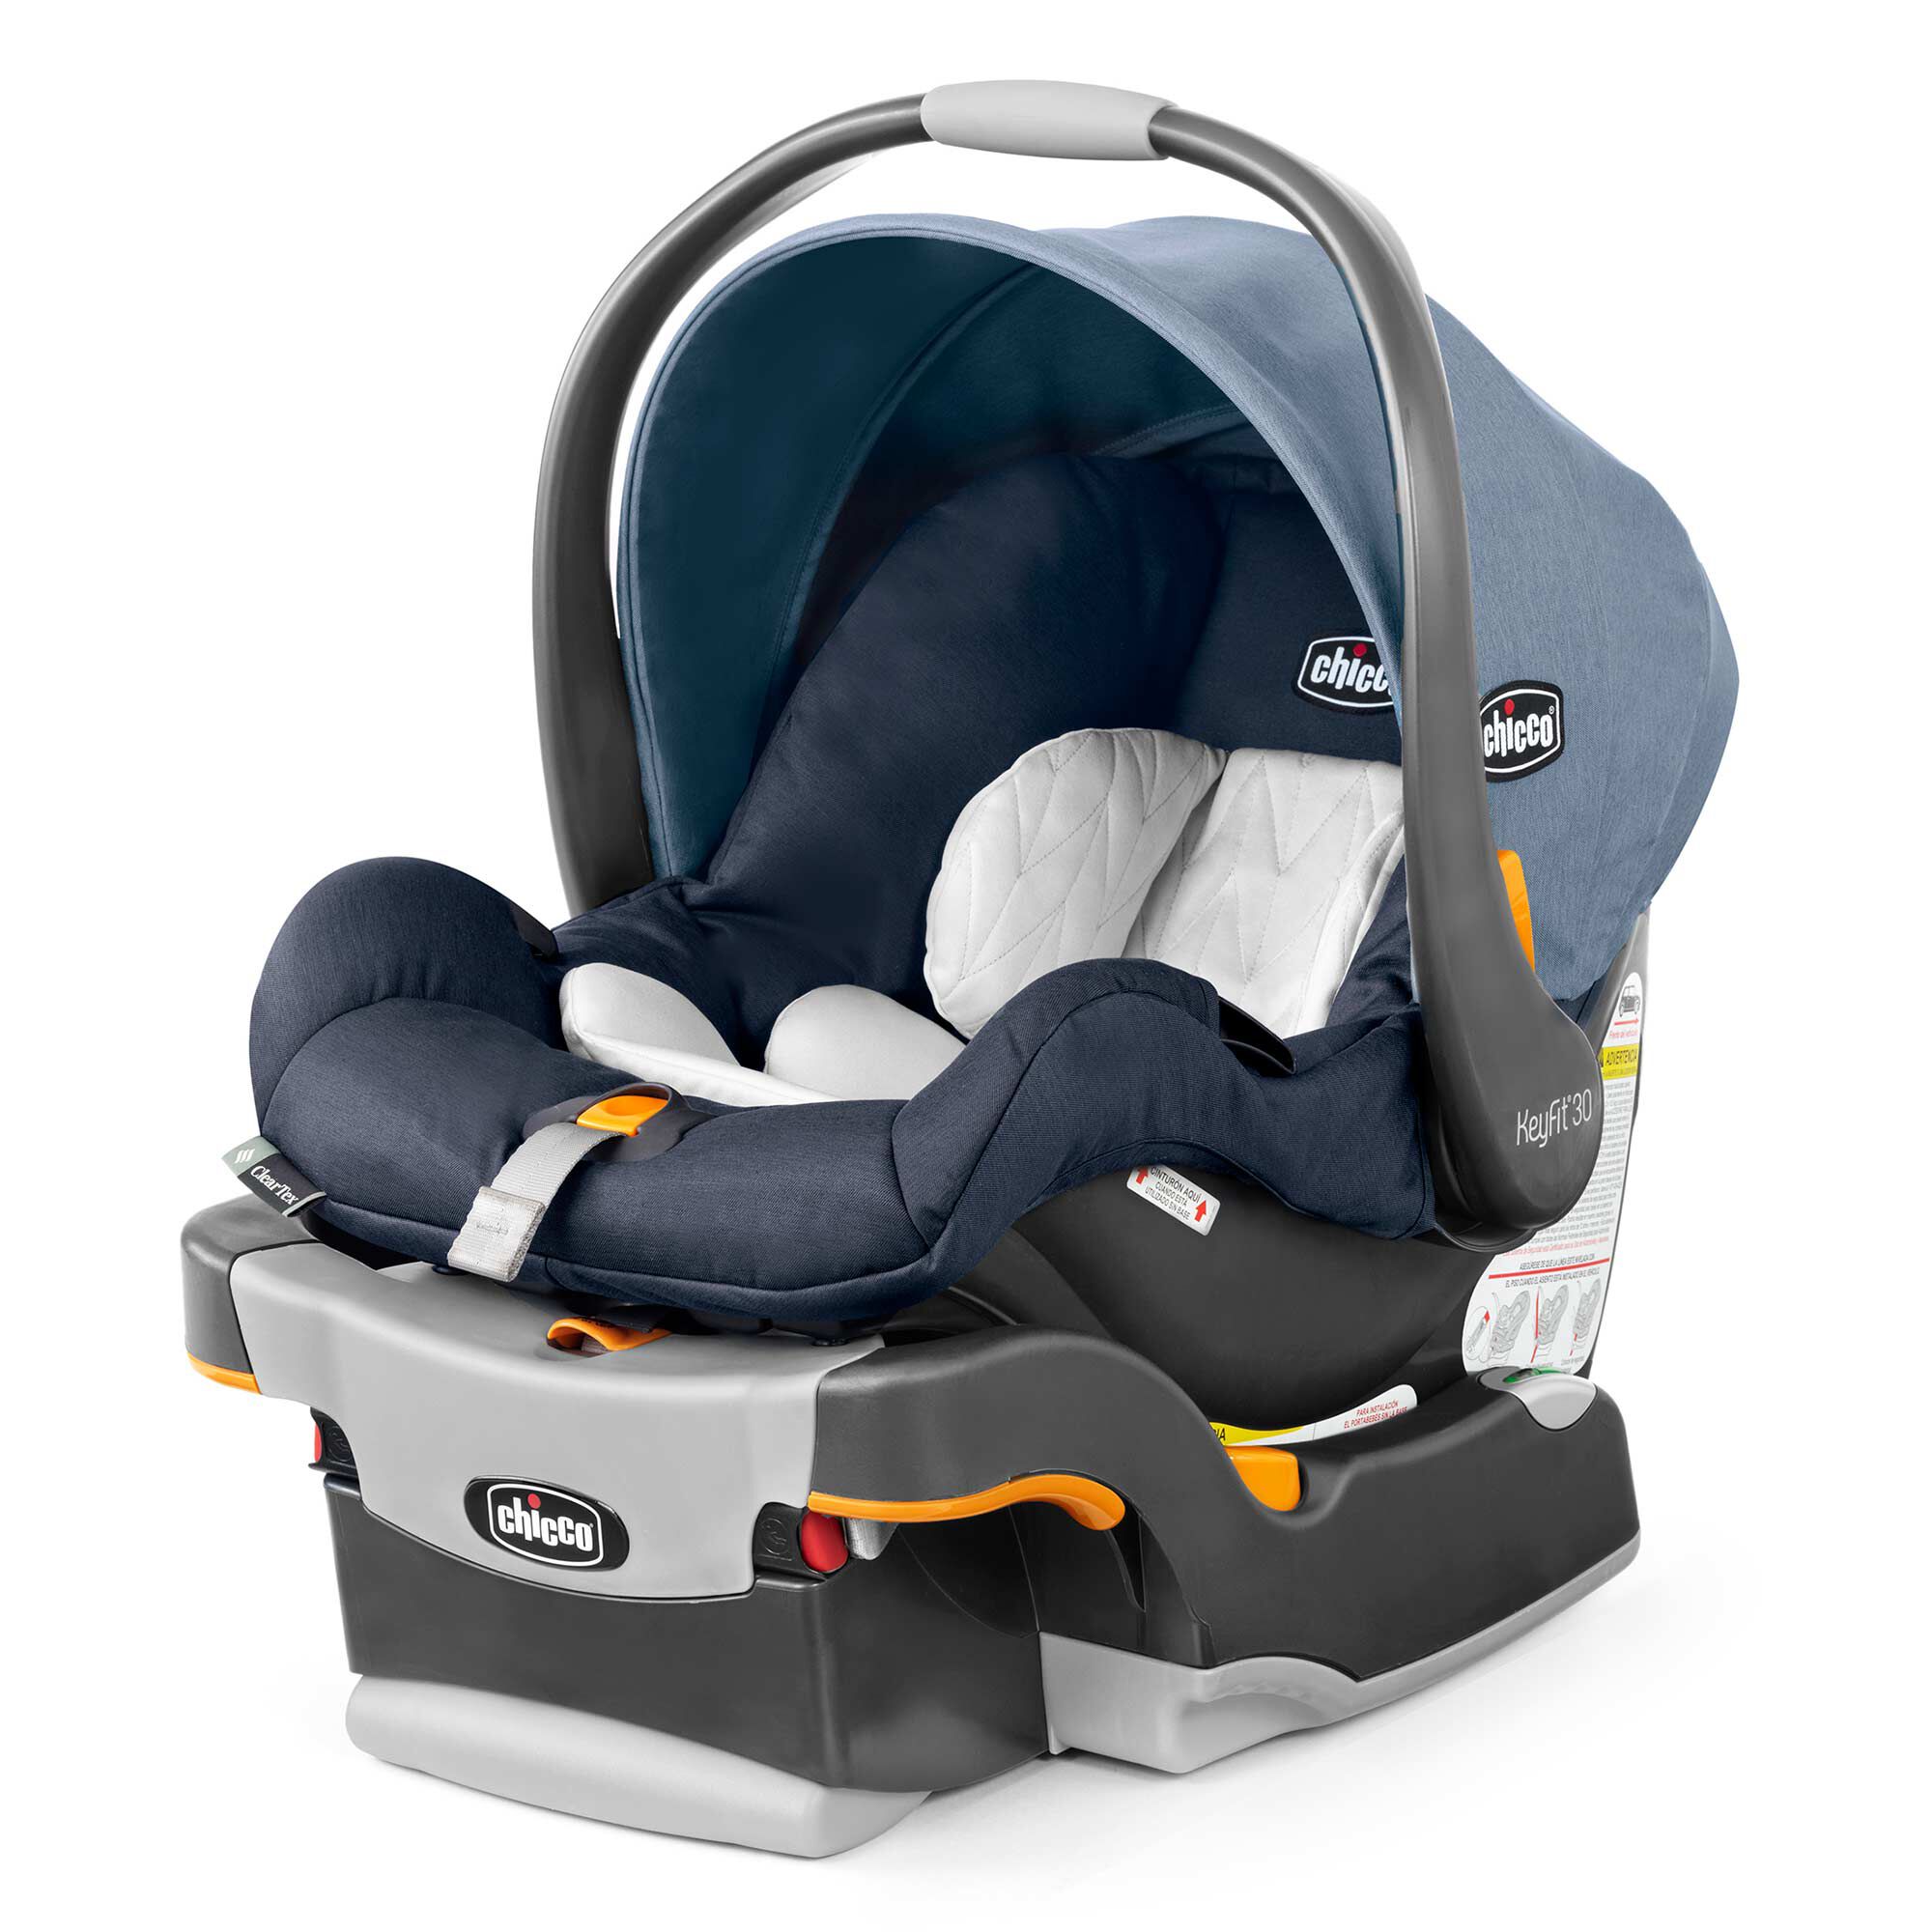 KeyFit 30 ClearTex Infant Car Seat | Chicco